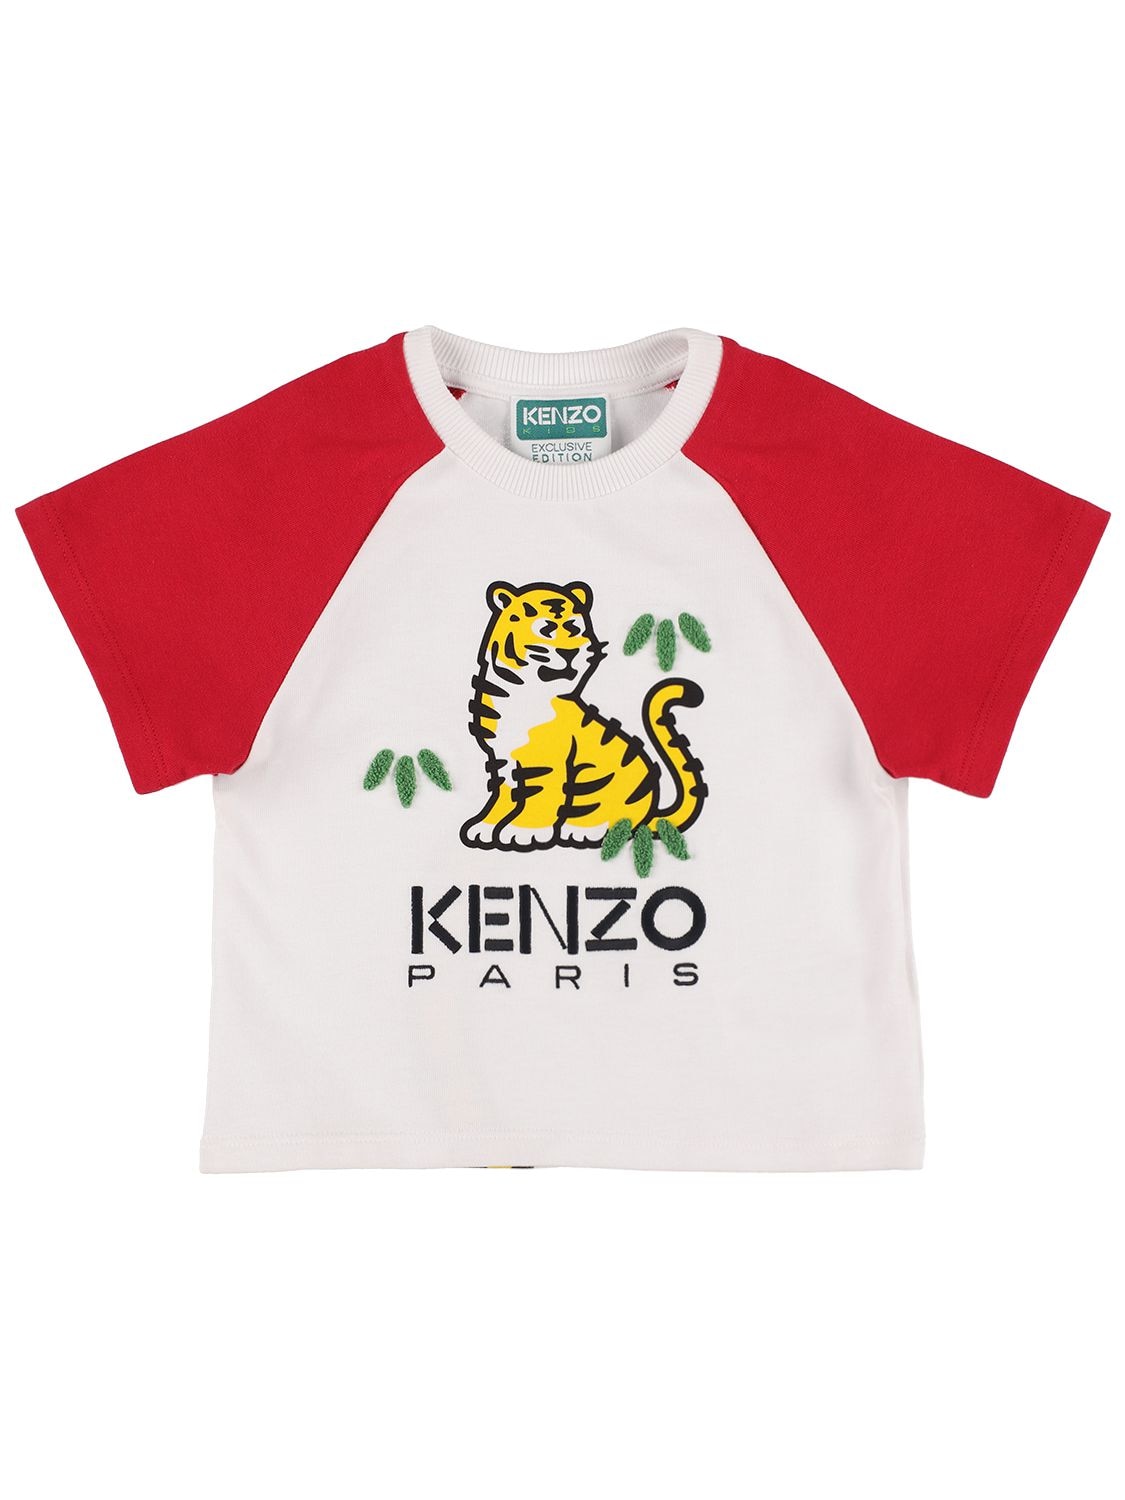 Kenzo Kids' Embroidered Cotton Jersey T-shirt In White,red